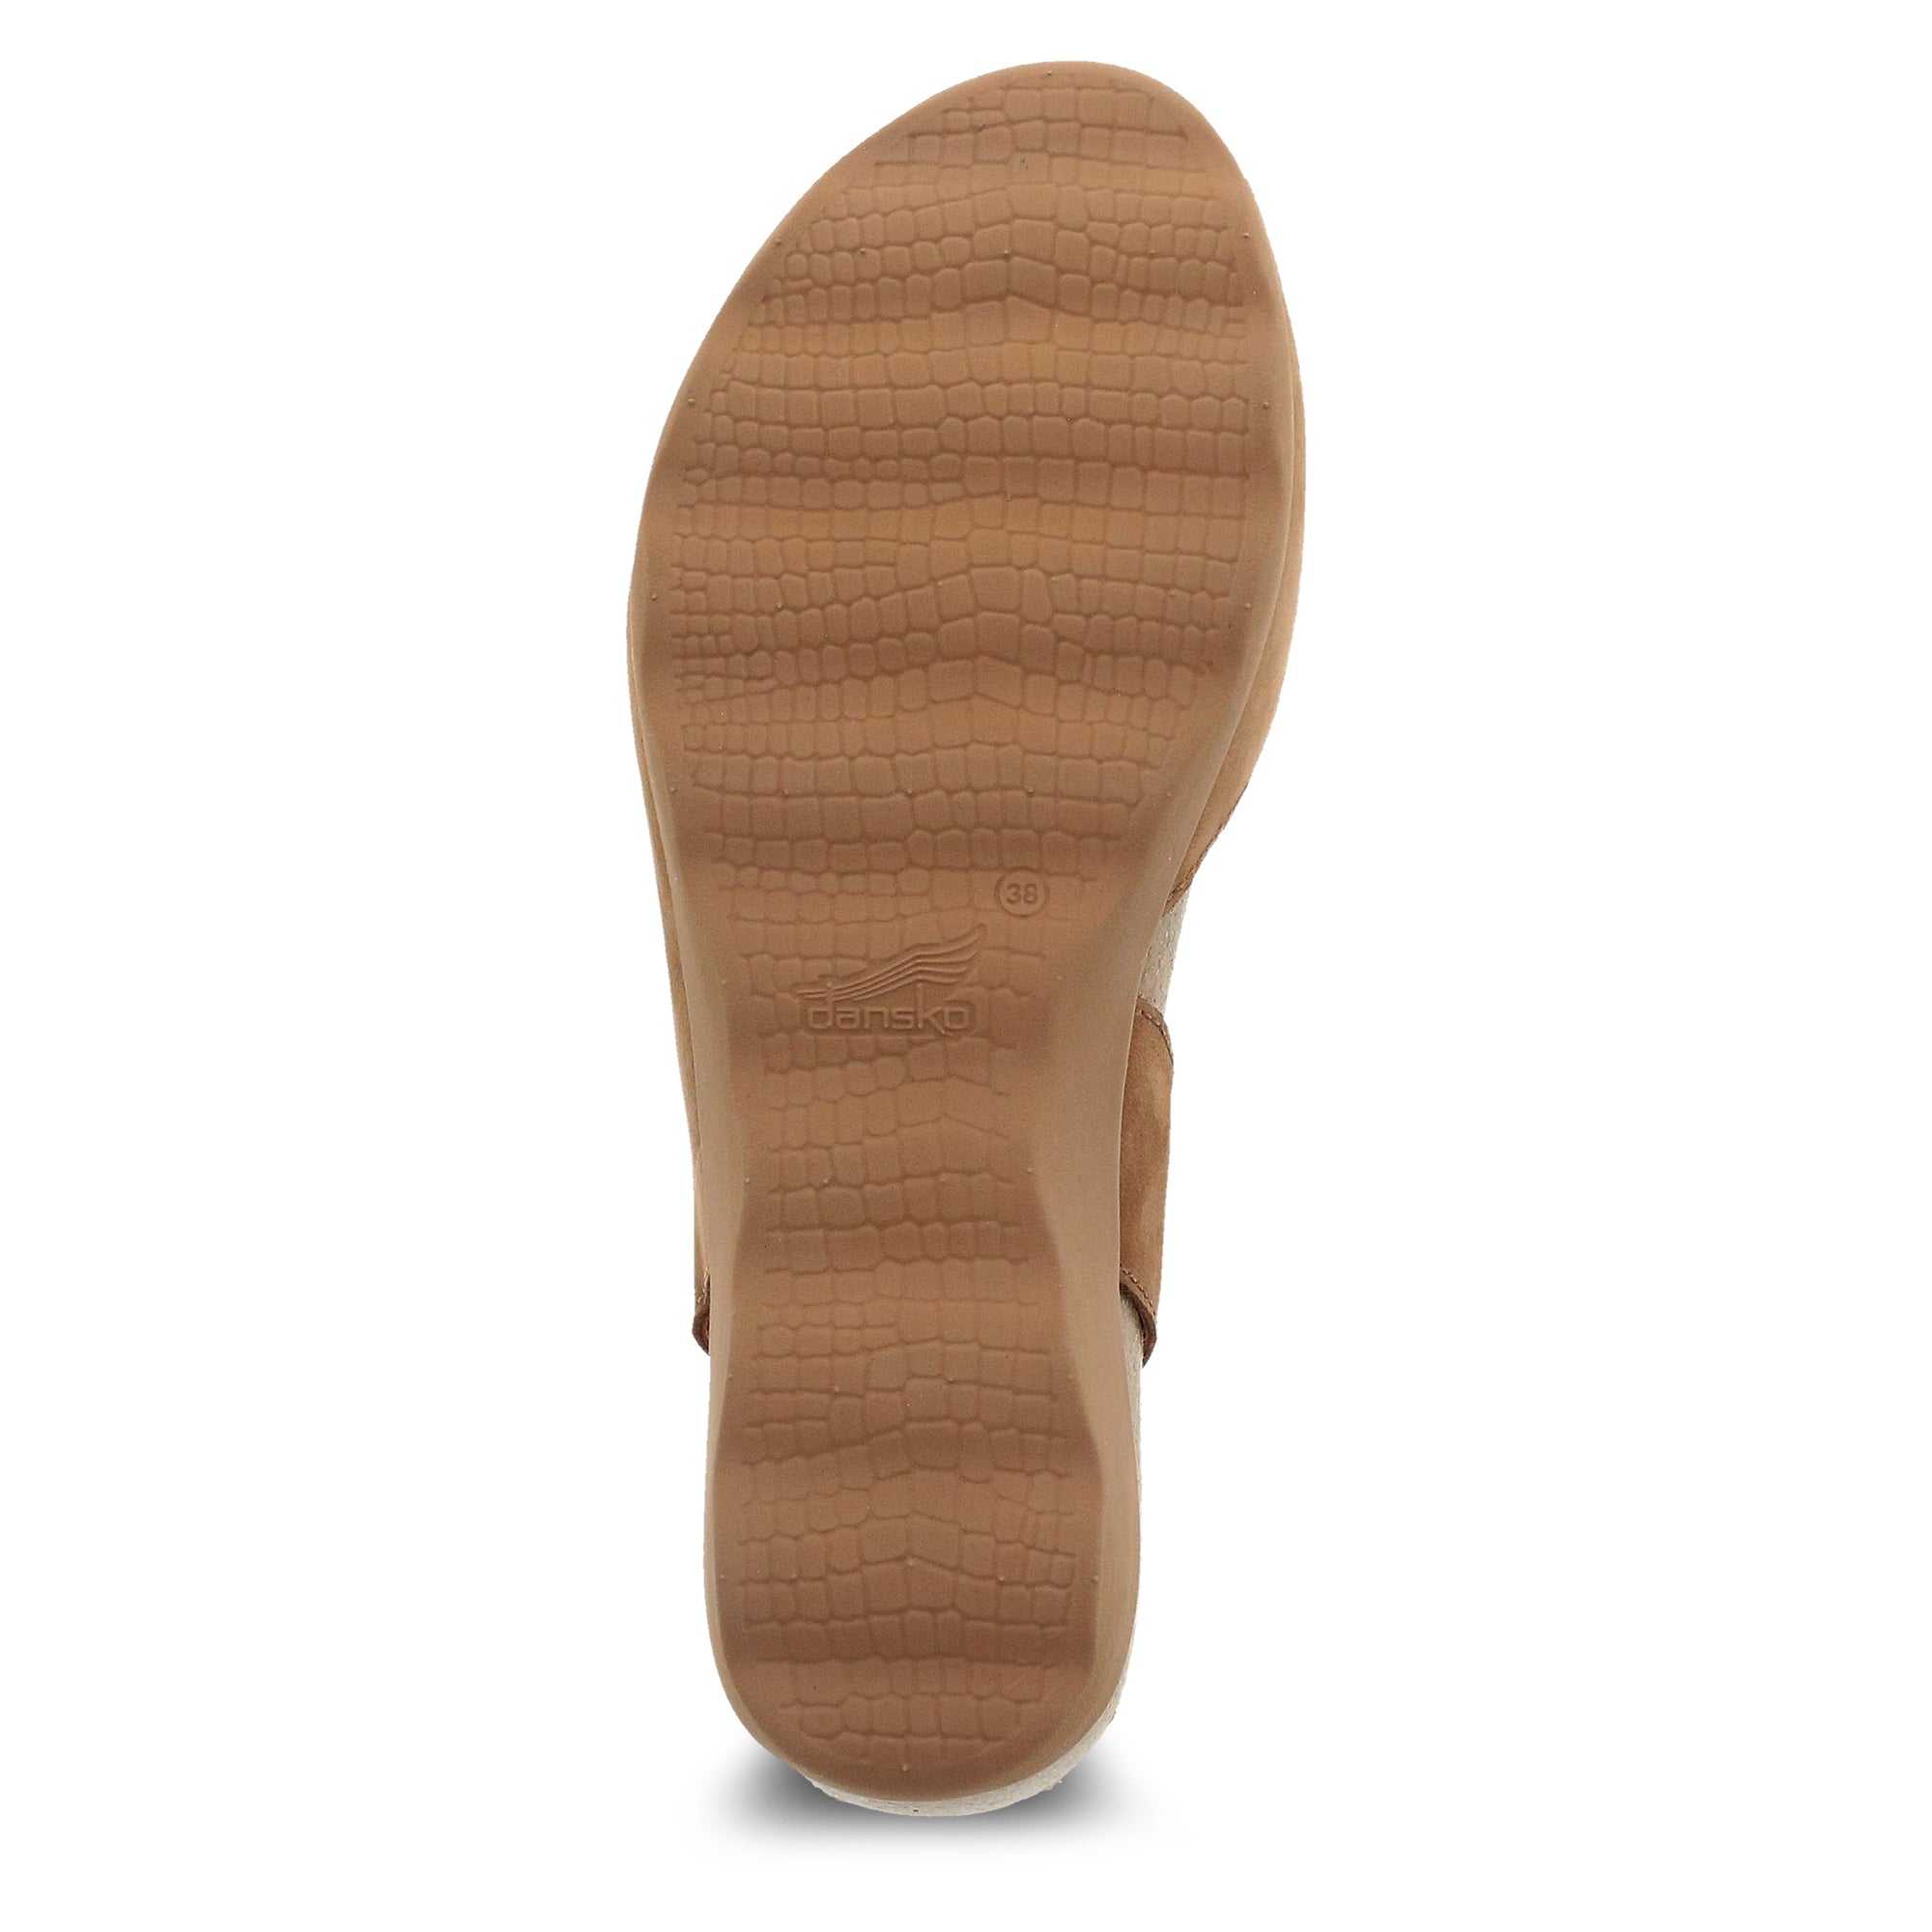 Sole image of Marcy Tan Milled Nubuck